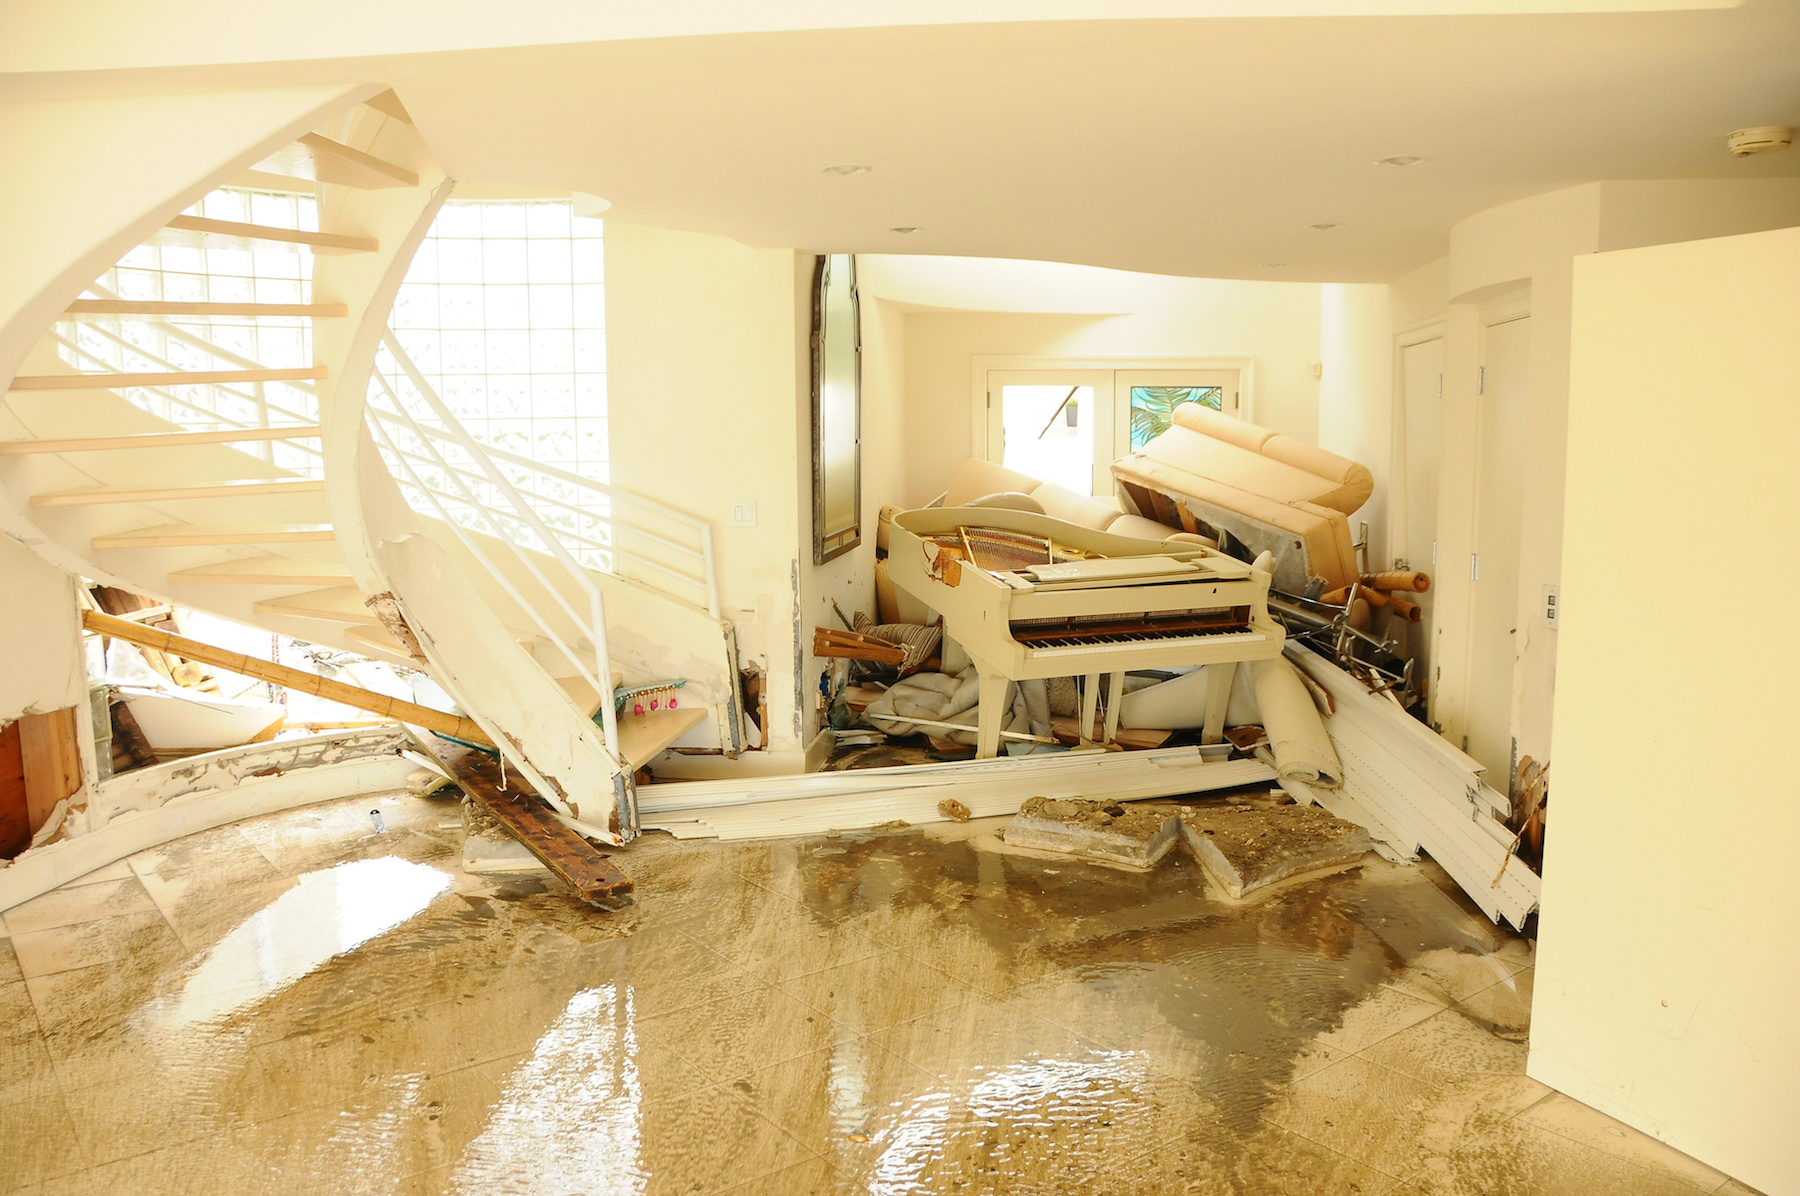 Flood Damage Insurance Claims in Fort Lauderdale